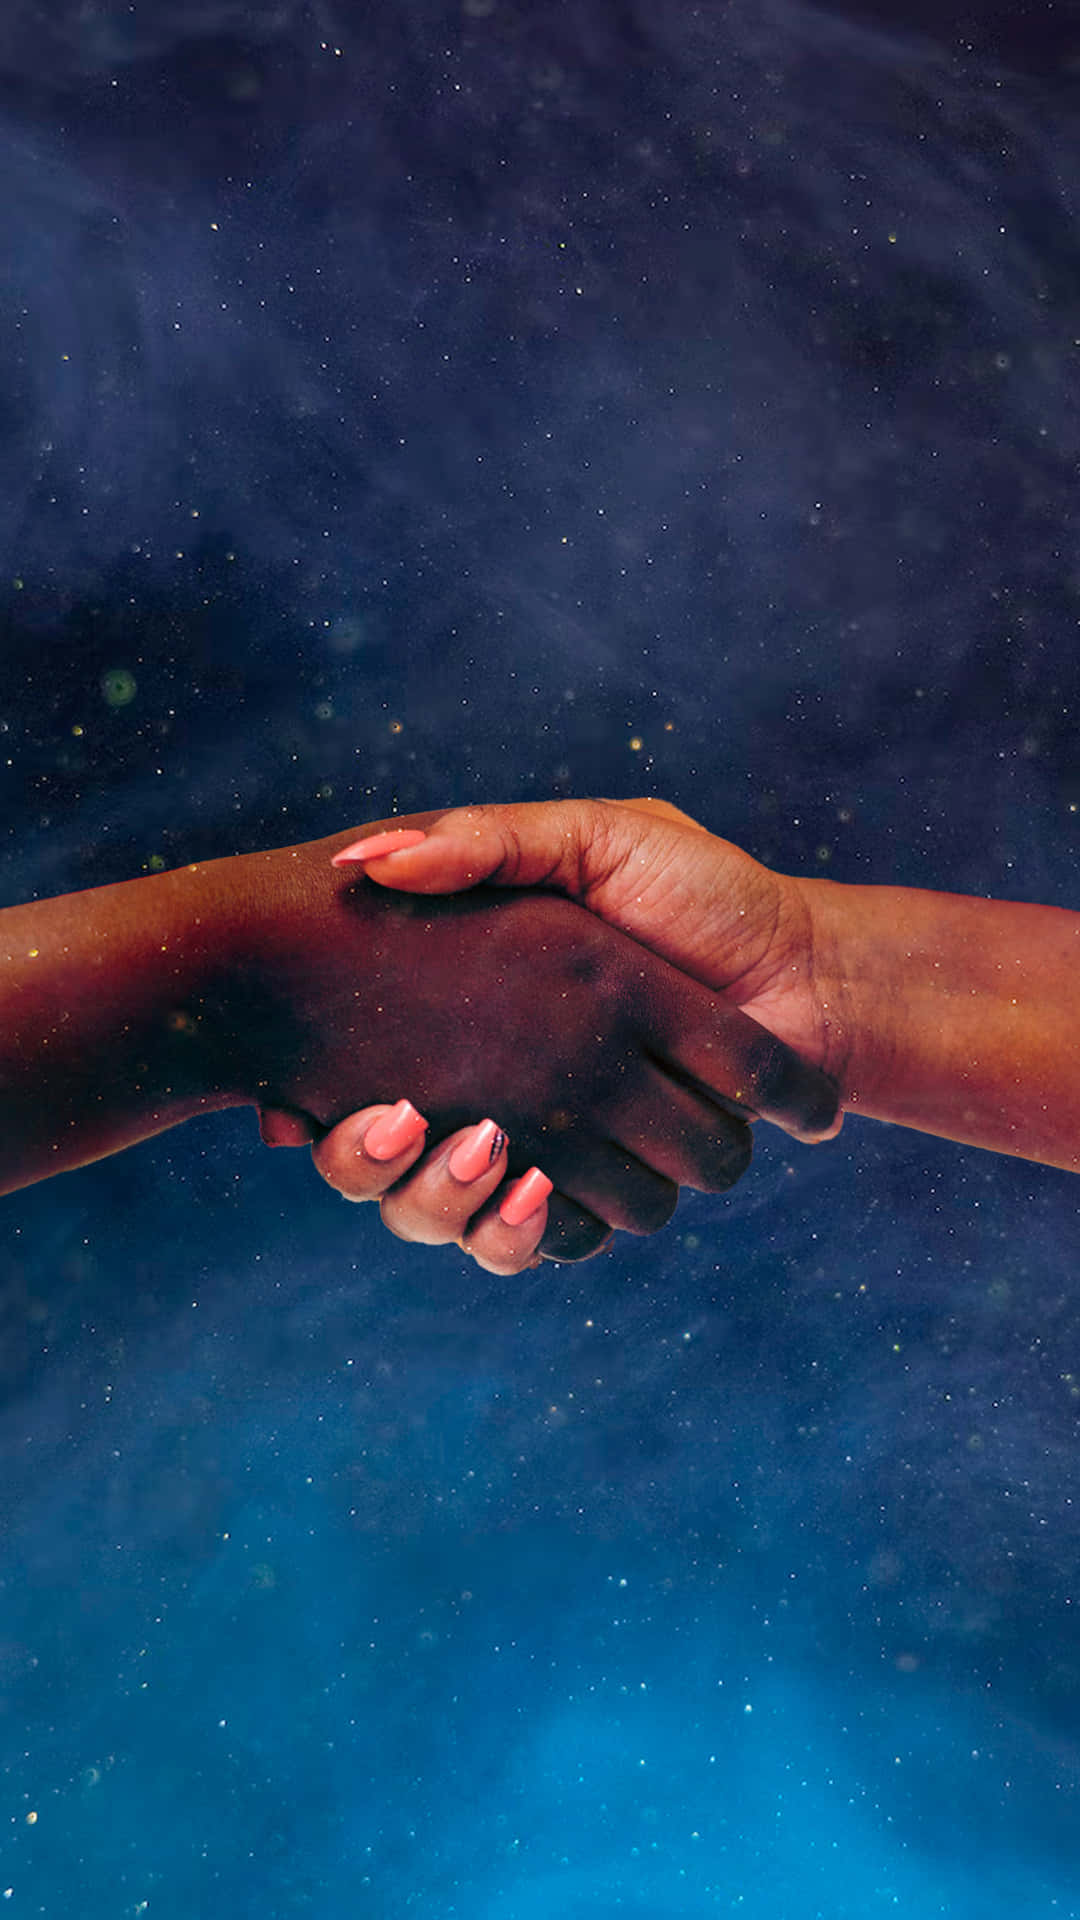 Handshake With Blue Starry Sky Background